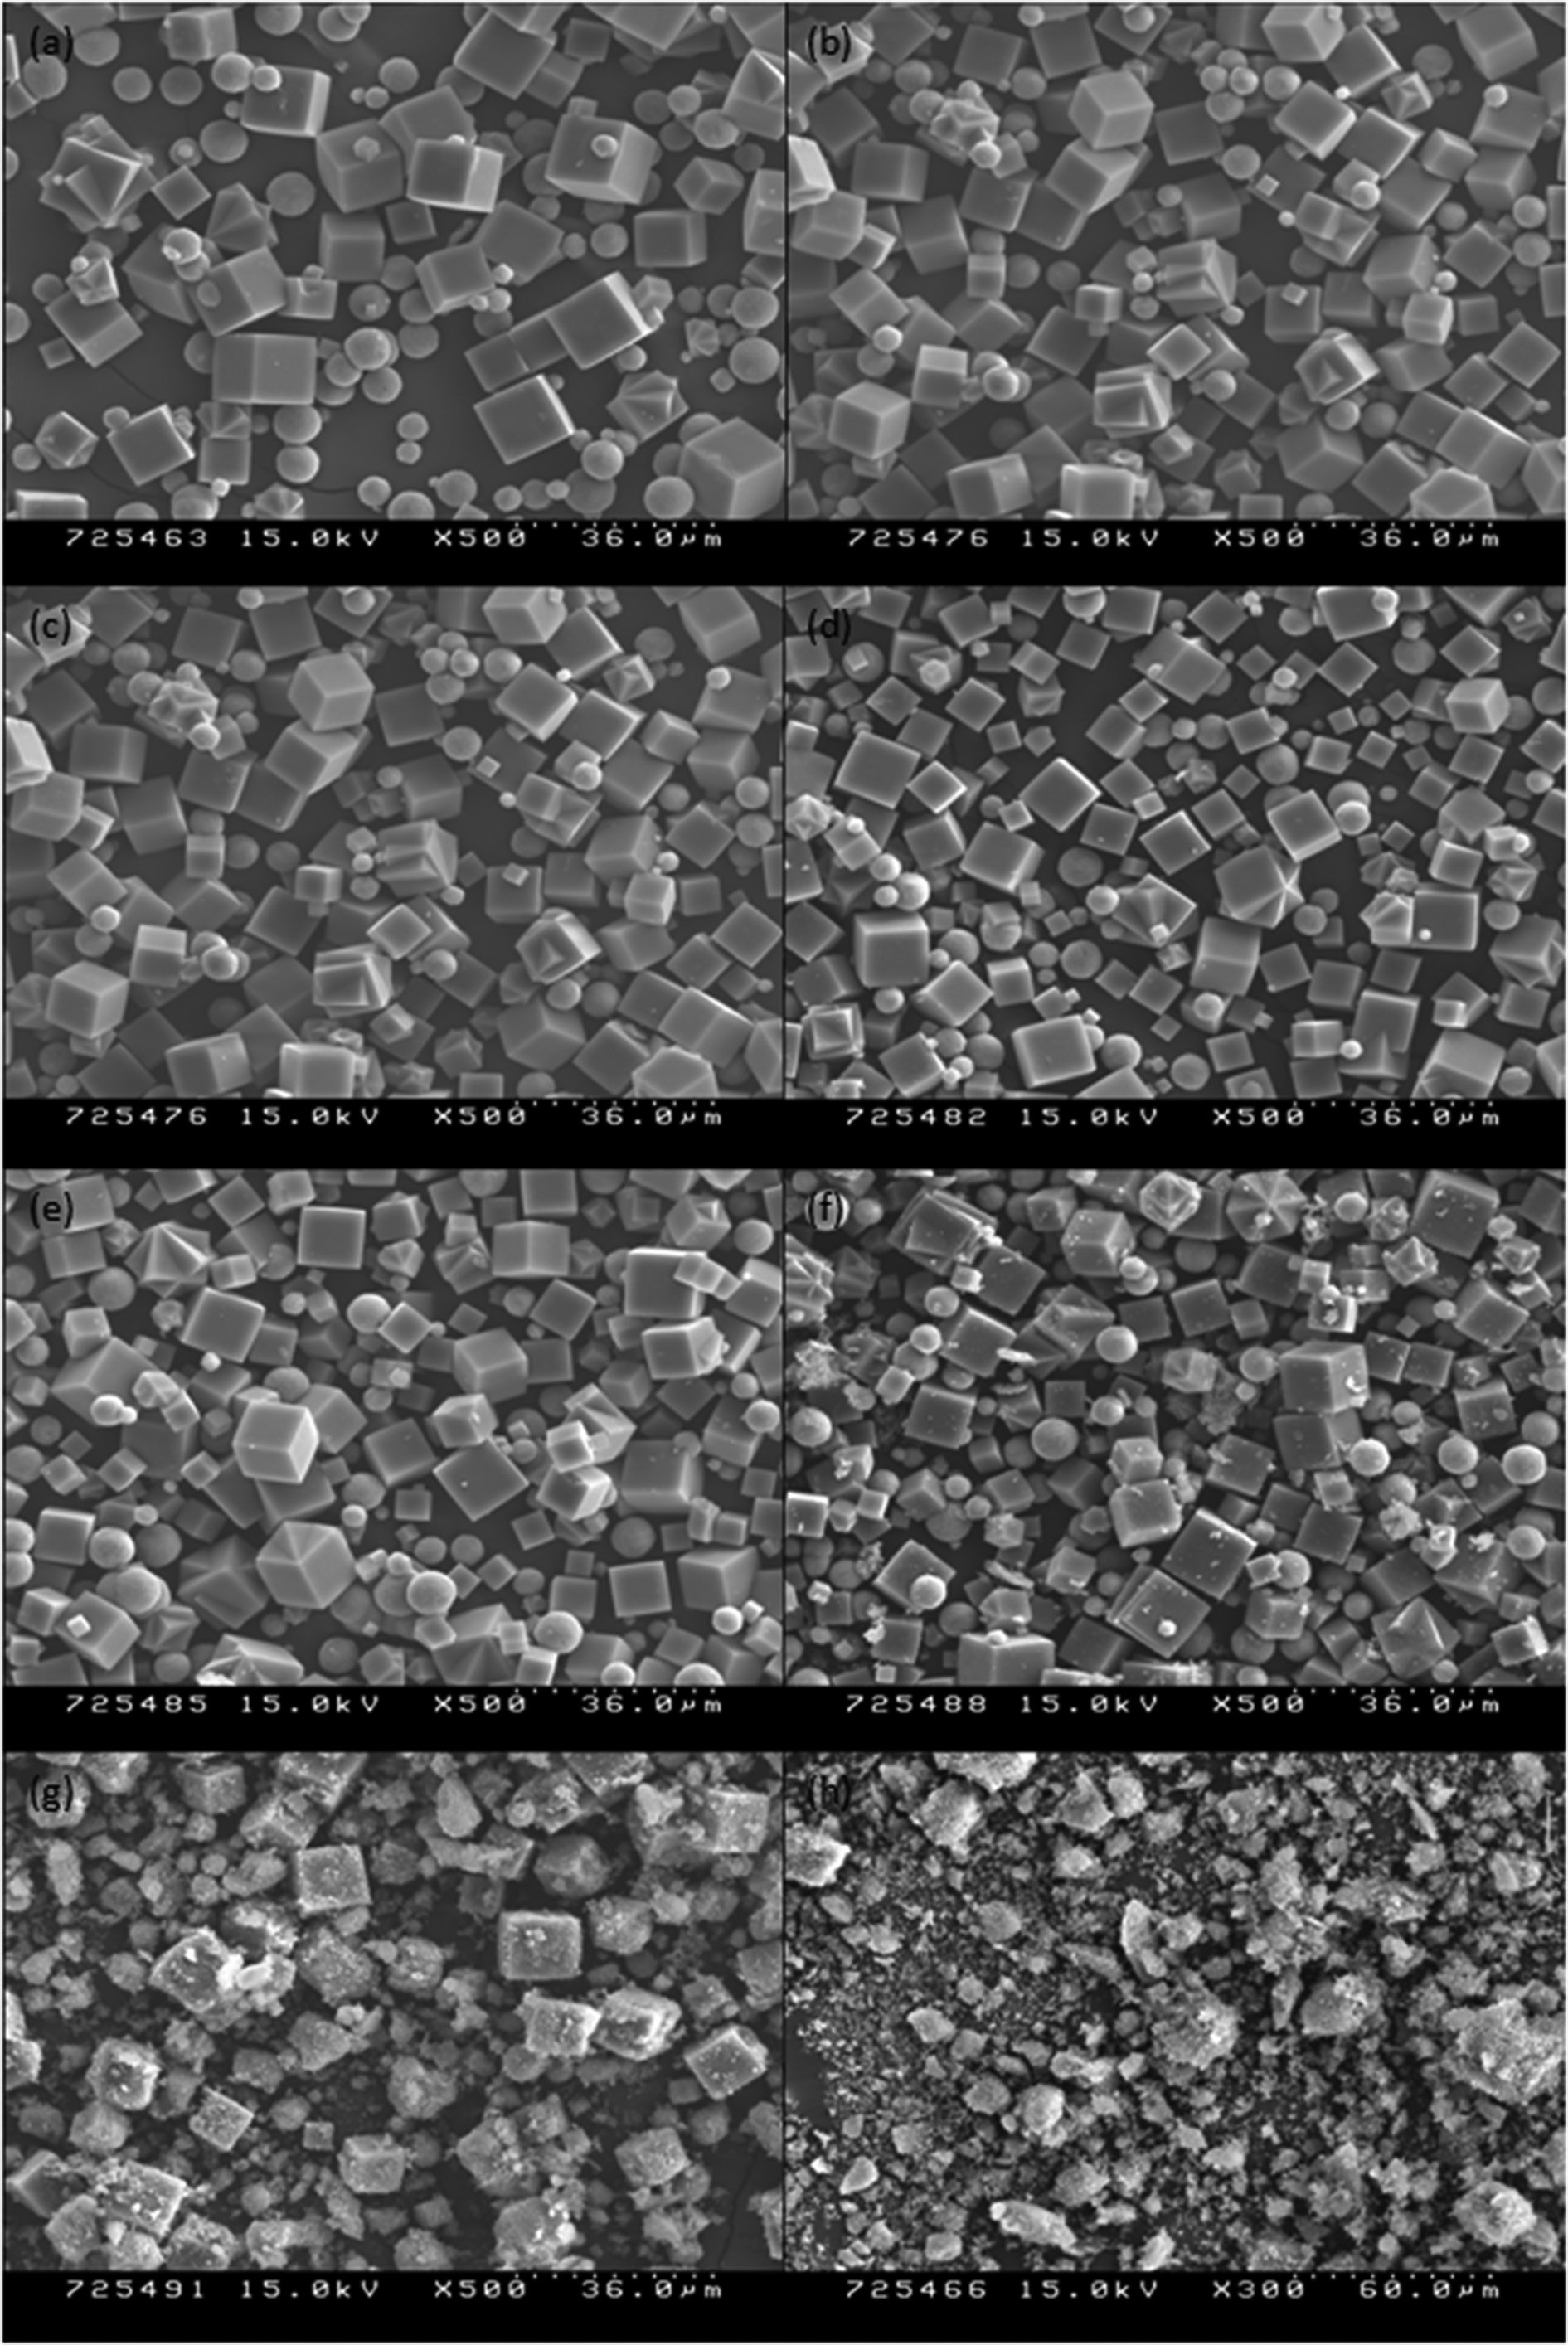 Scanning electron microscopy images of iron-incorporated zeolite type-A prepared under condition 1 of Table 1, where (a) to (h),
respectively; refer to iron contents of 0 (a), 0.001 (b), 0.003 (c), 0.005 (d), 0.01 (e), 0.03 (f), 0.05 (g), and 0.3 (h).